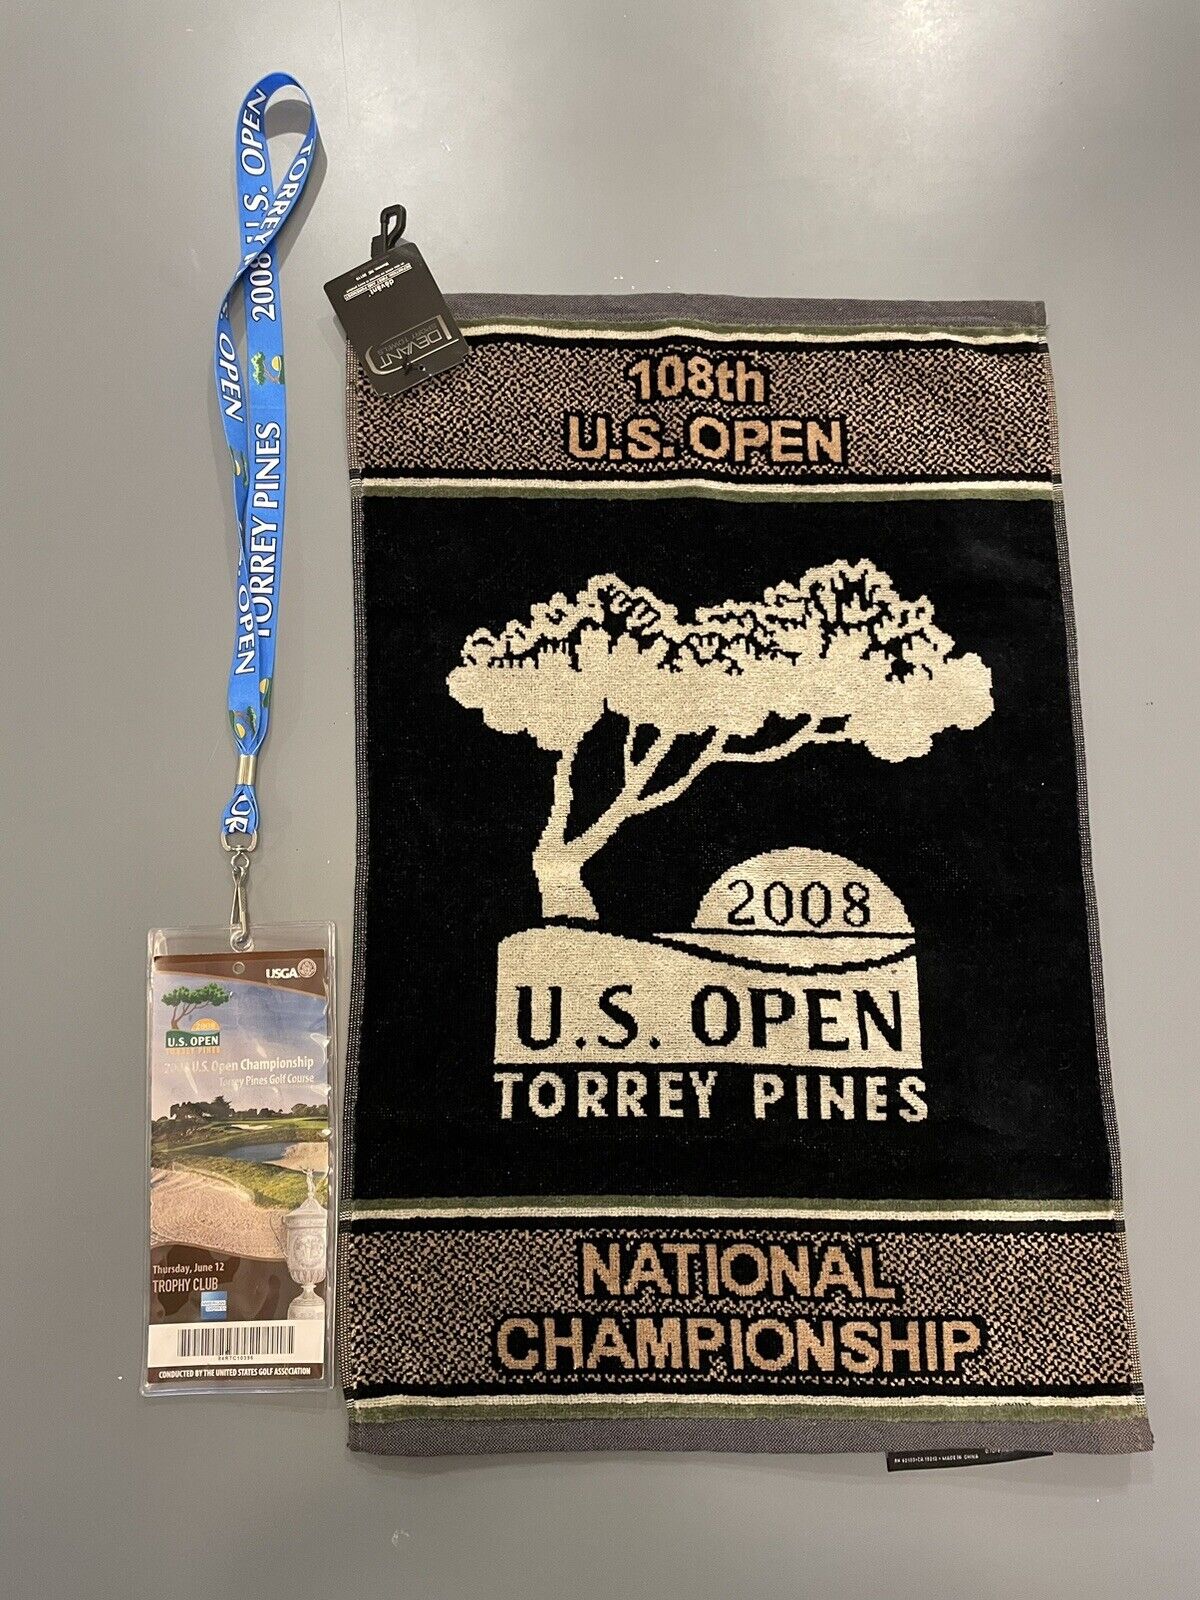 NEW 2008 US Open Torrey Pines Golf Towel and Ticket 108th Edition National Champ